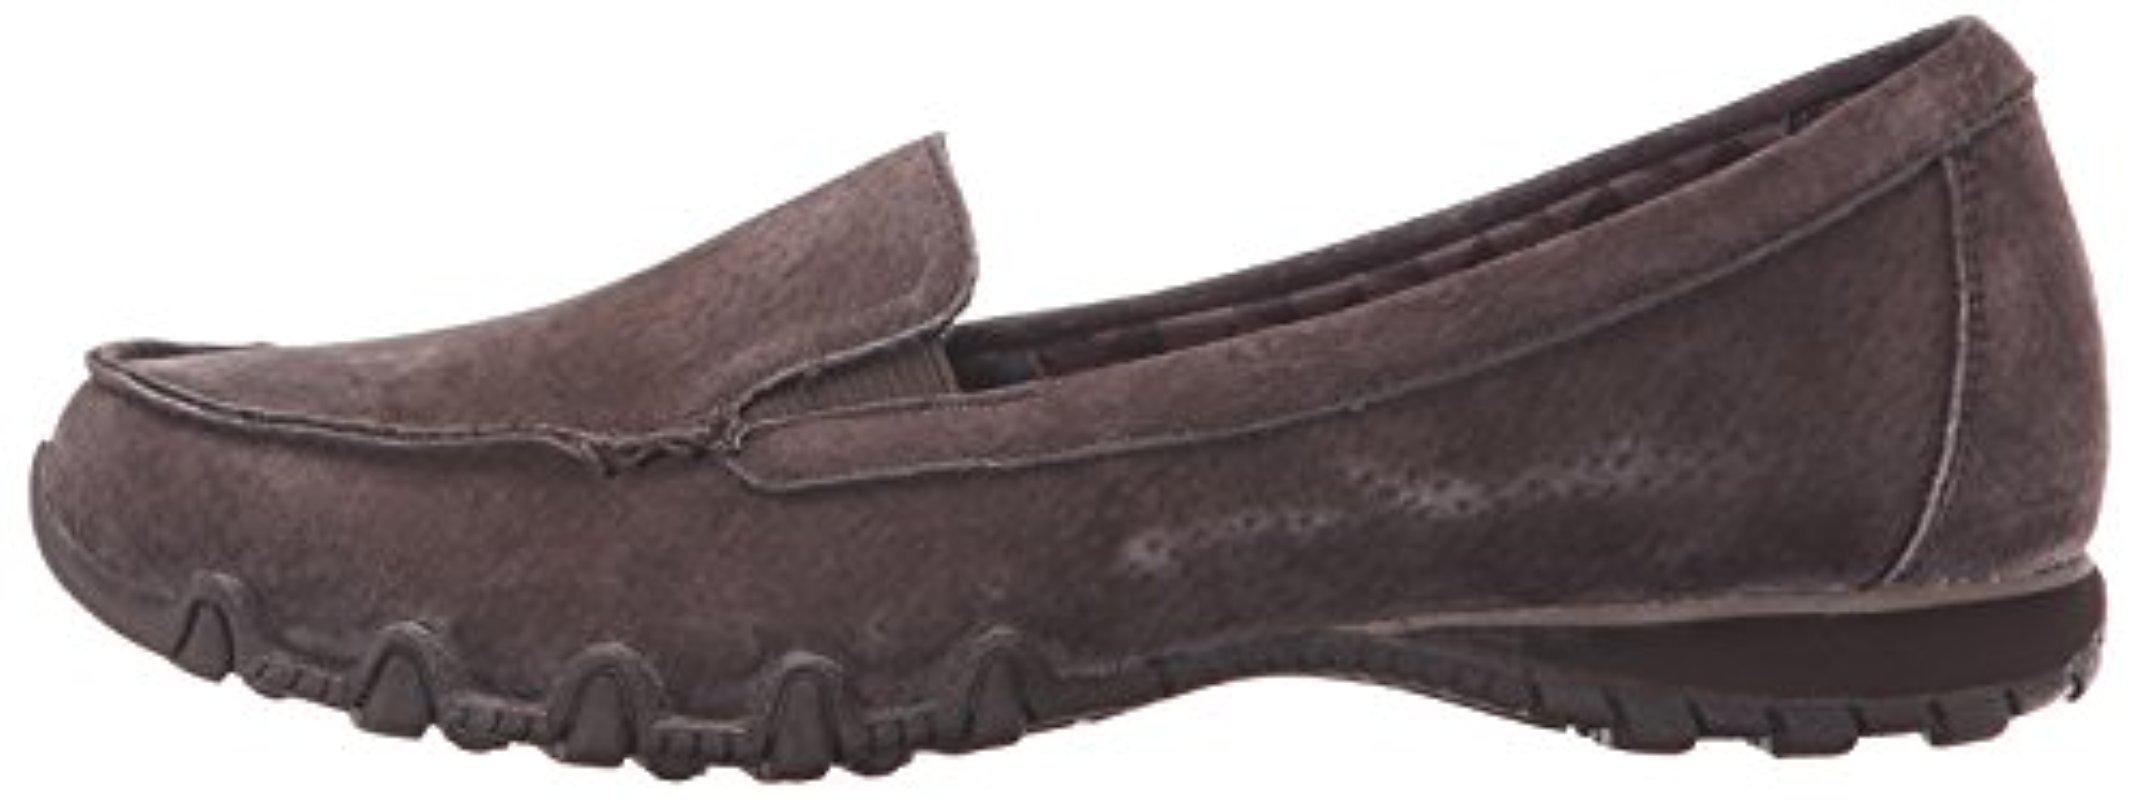 Skechers Bikers Pedestrian Memory Foam Slip-on Moccasin,5.5 M Us,chocolate  Suede Relaxed - Save 48% - Lyst